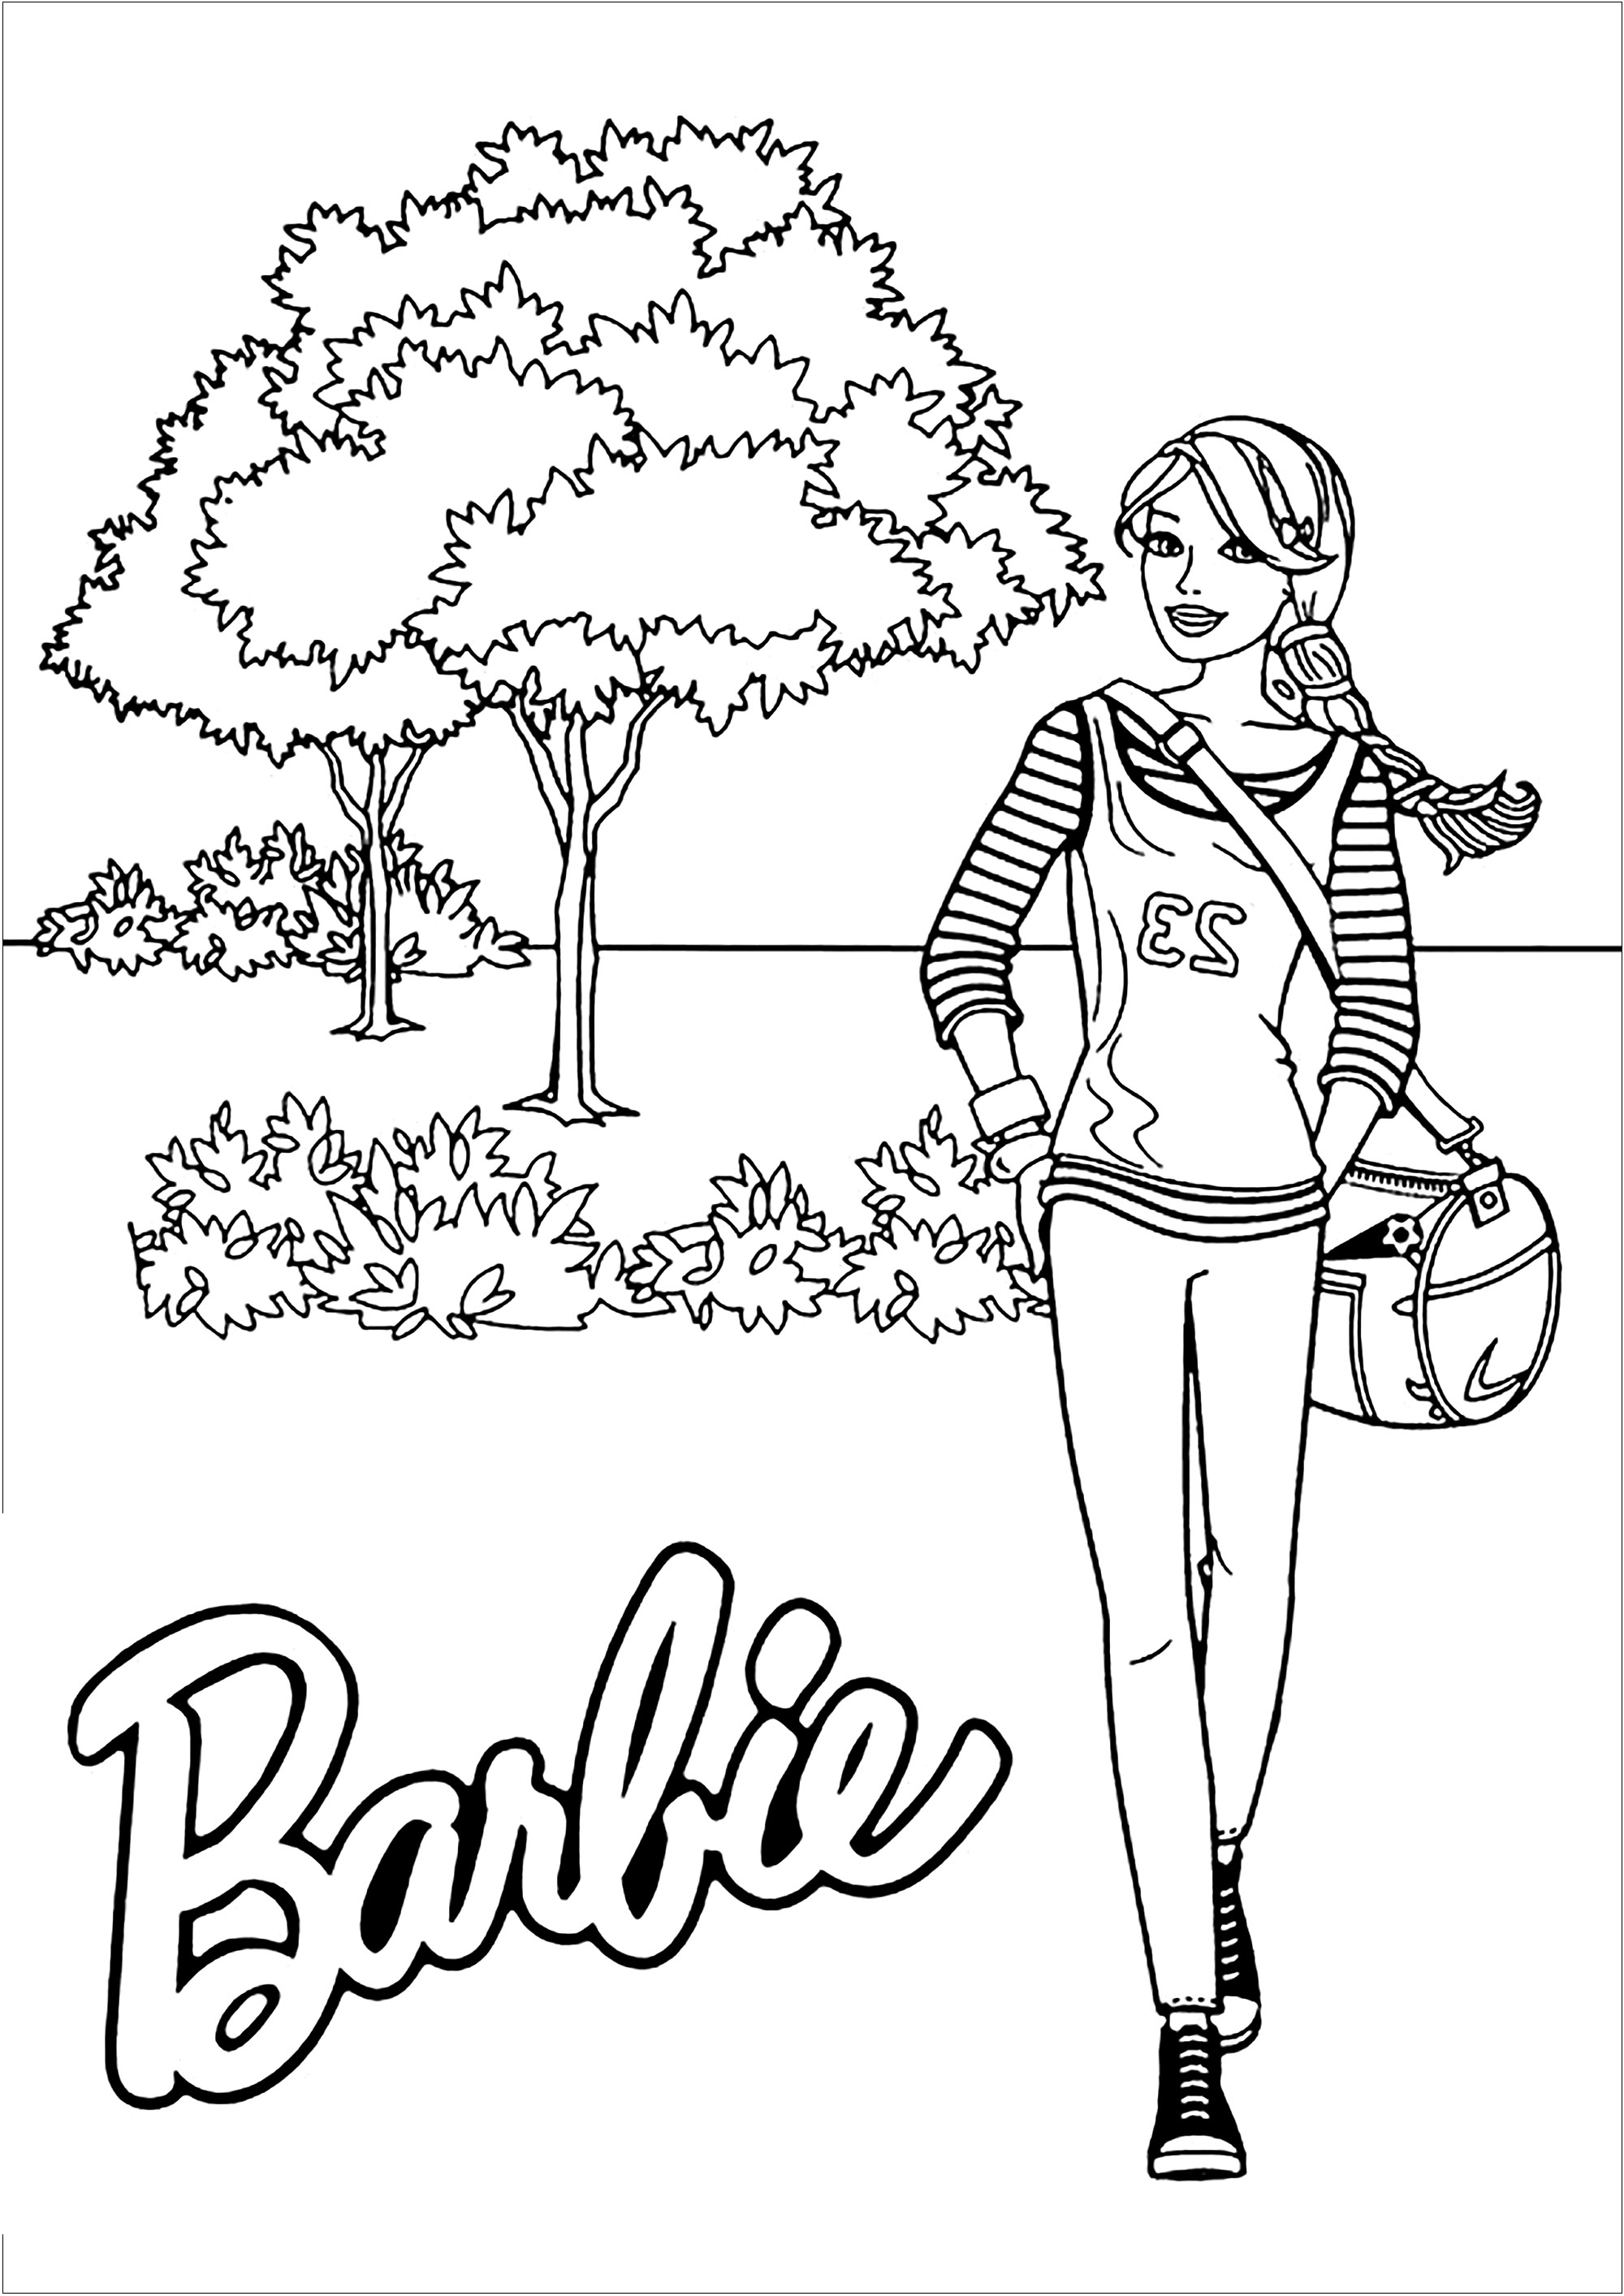 children walking coloring page